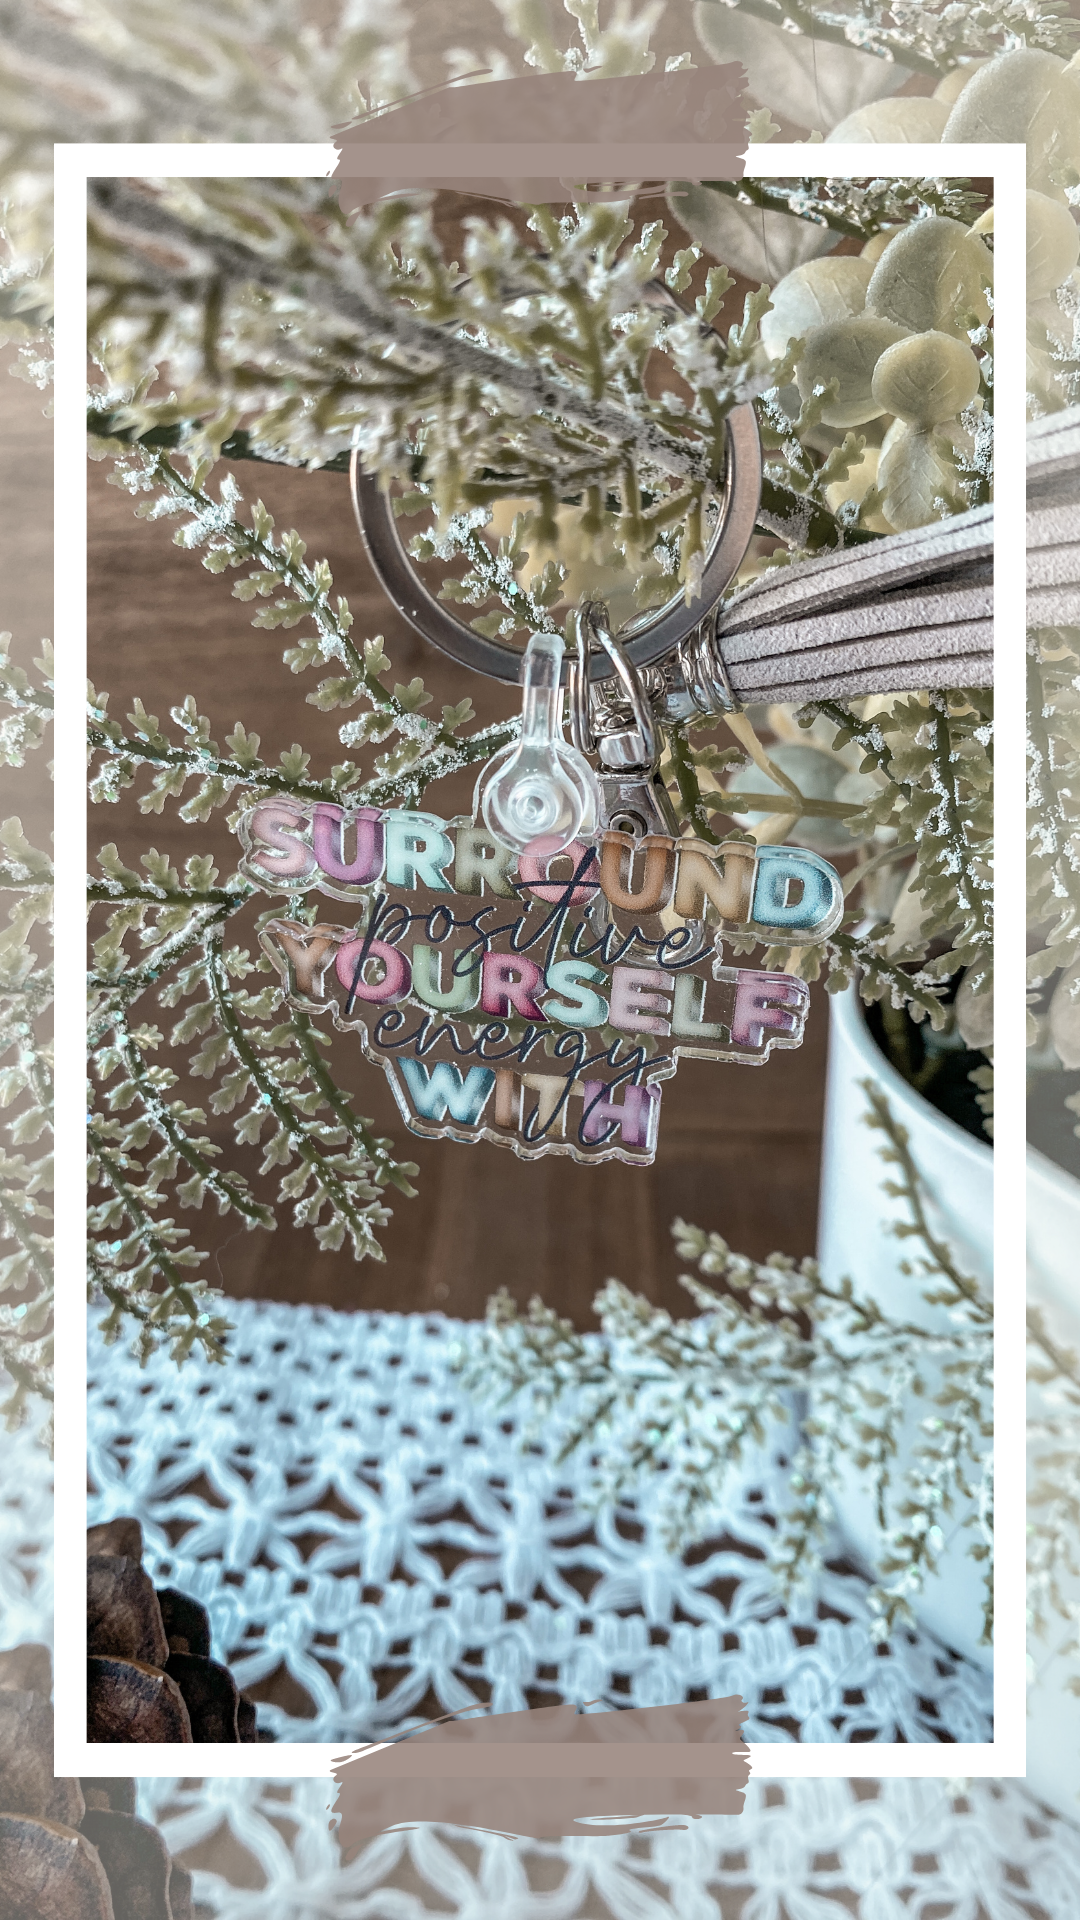 Surround Yourself with Positive Energy Keychain